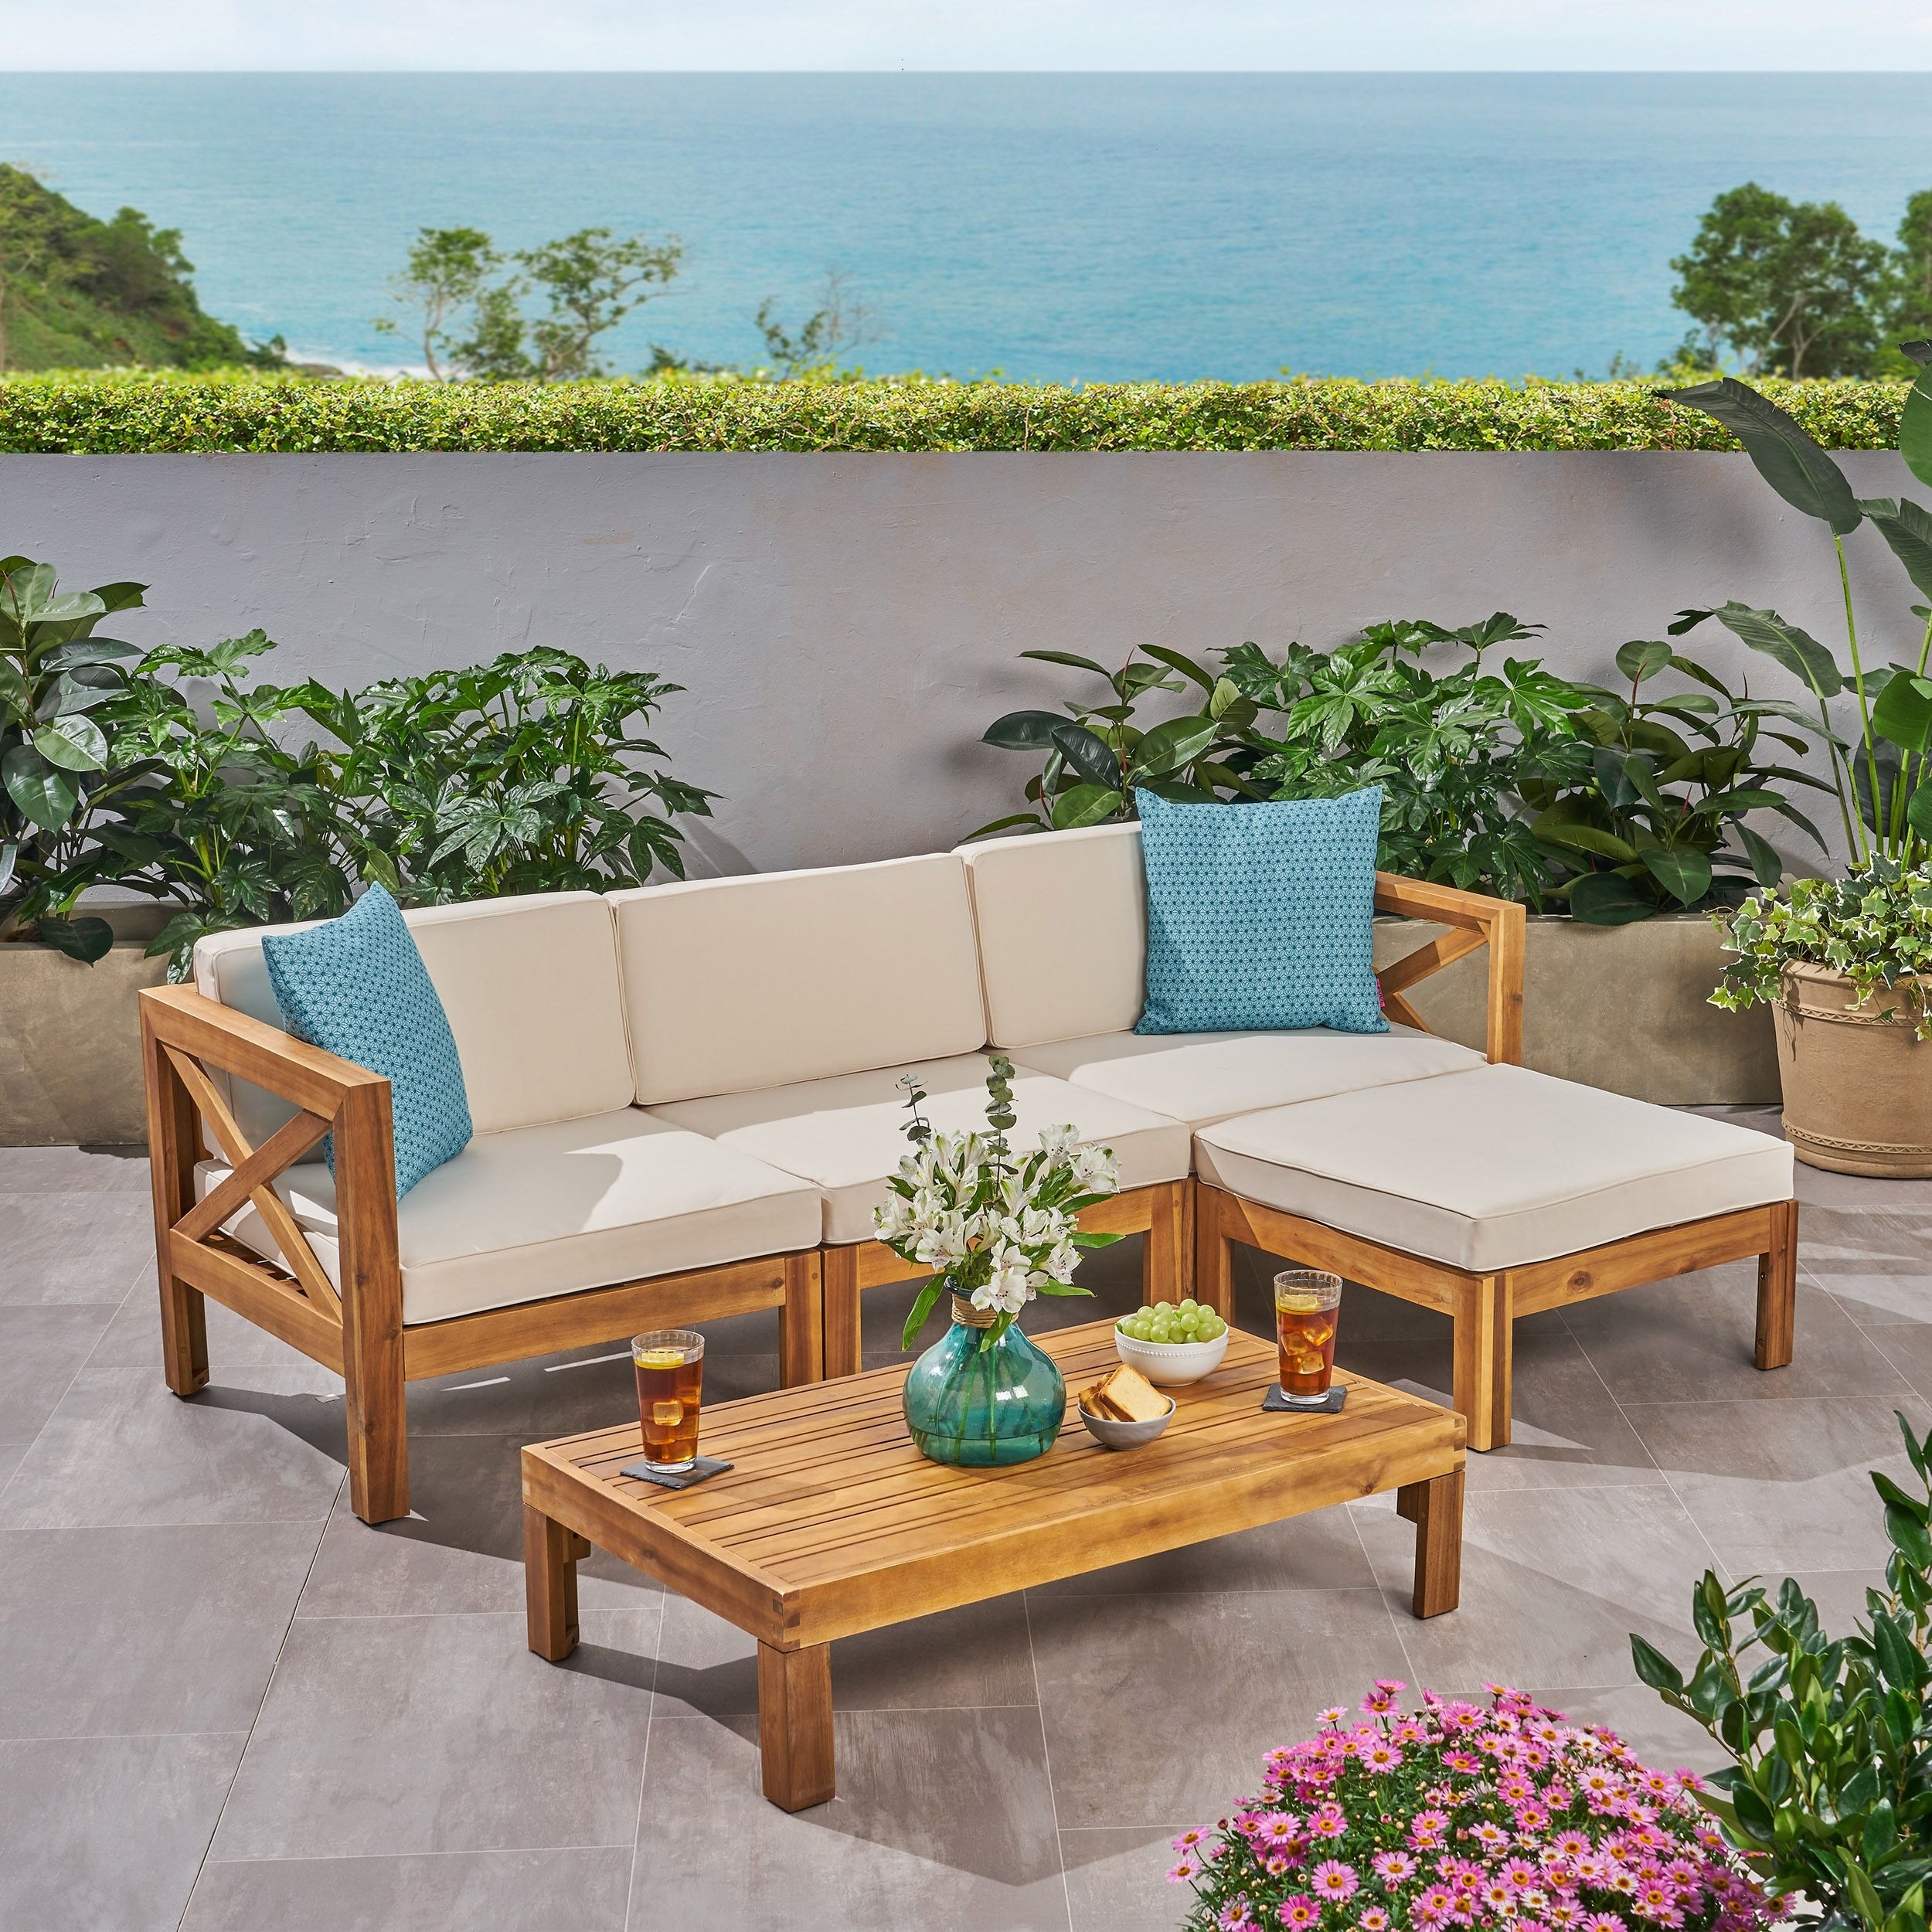 Alcove Outdoor Acacia Wood 5 Piece Sofa Setchristopher Knight Home – On  Sale – – 26474504 Pertaining To 5 Piece Outdoor Patio Furniture Set (View 10 of 15)